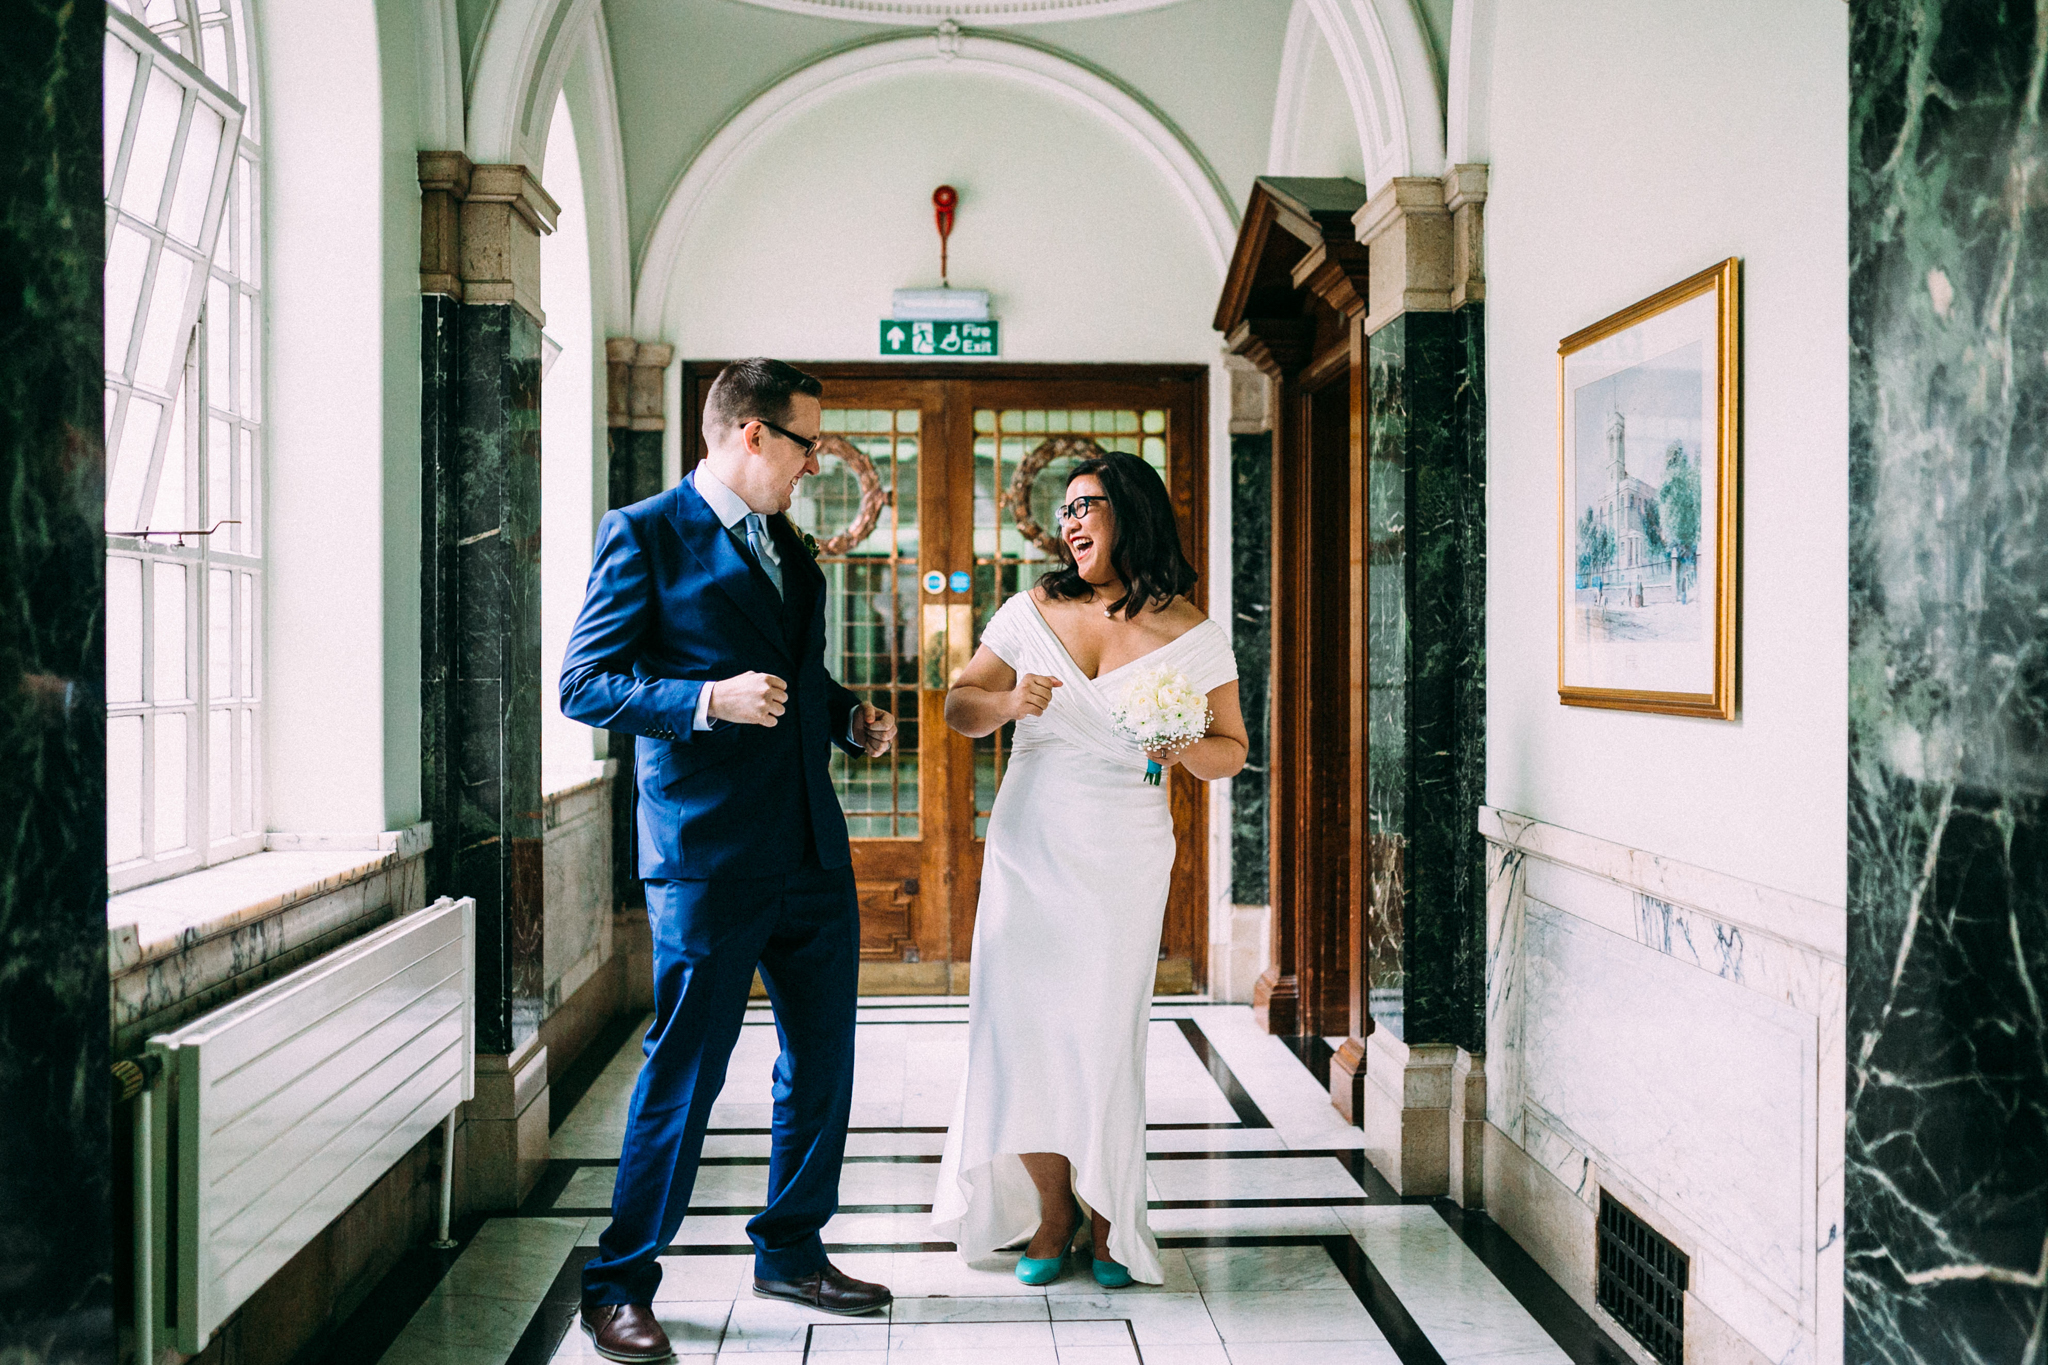 wedding photographer in london islington town hall - first look between bride and groom ceremony photos